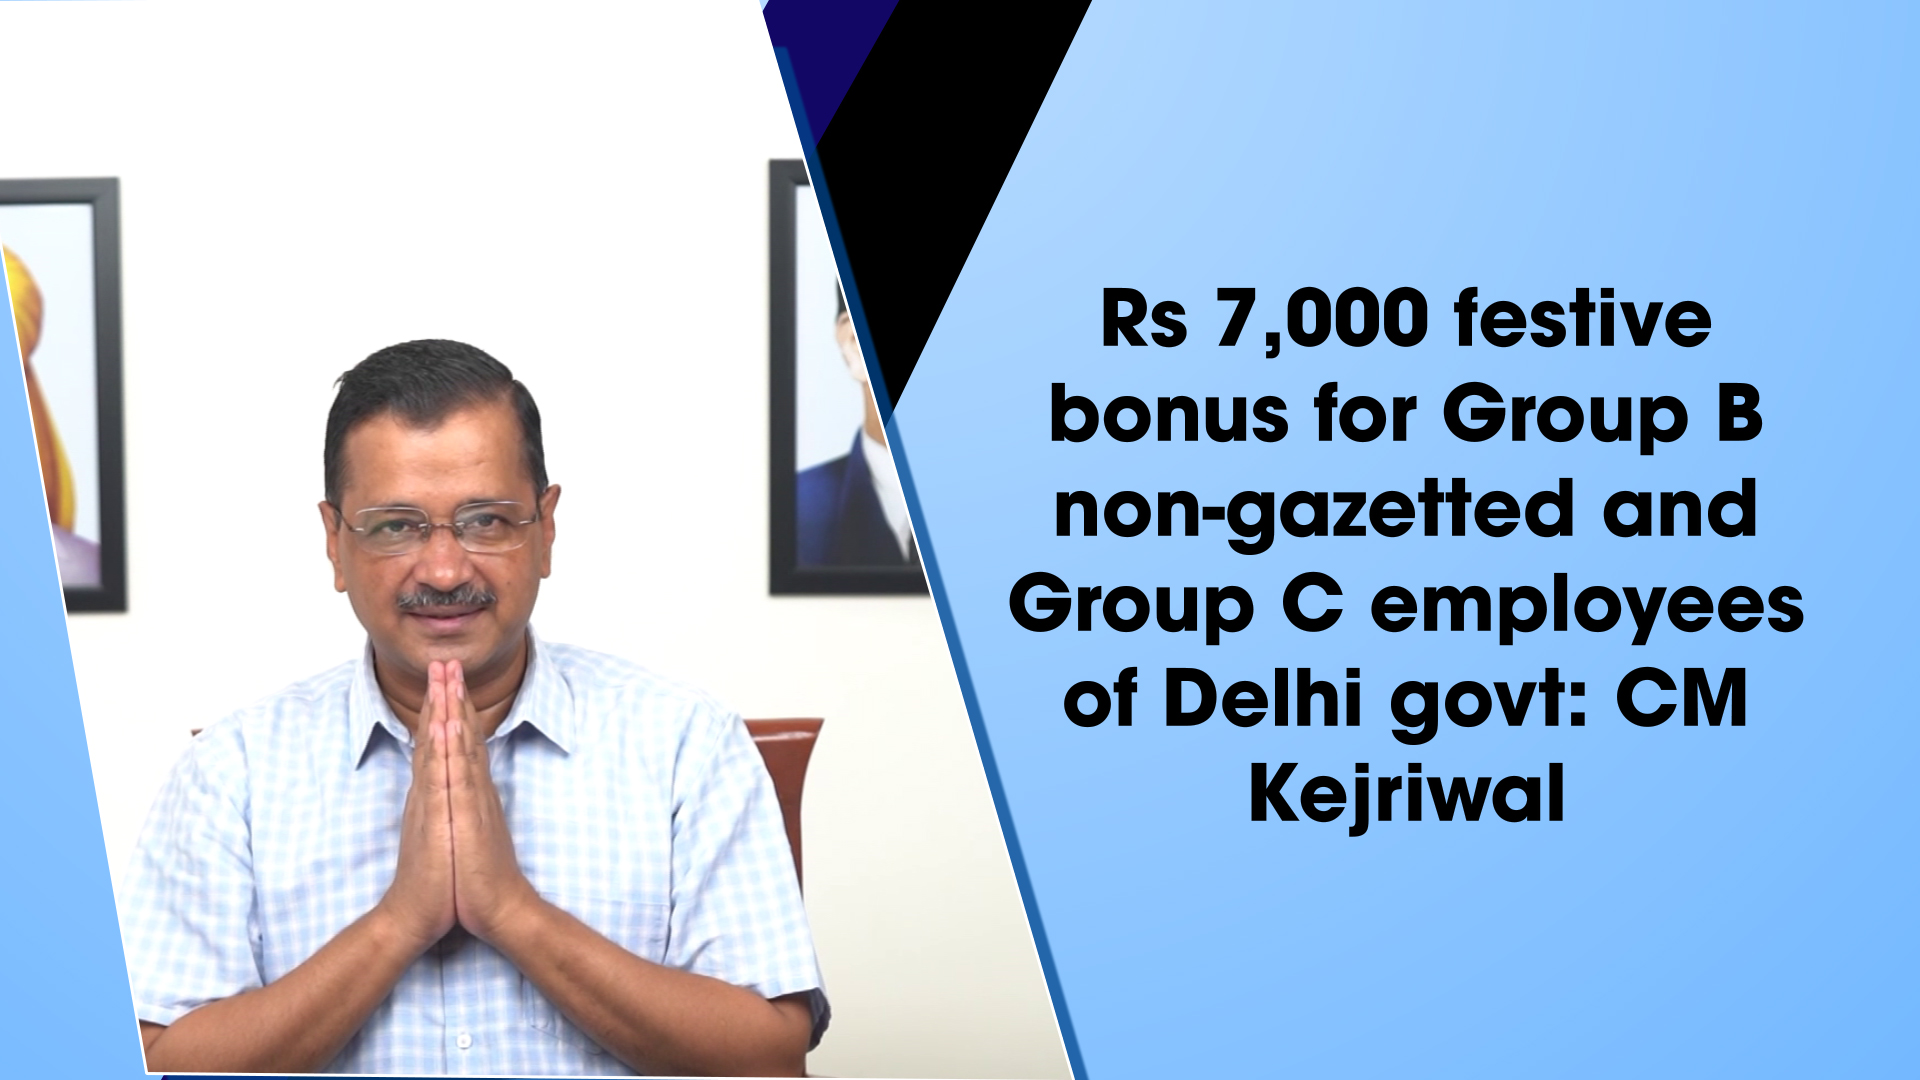 Rs 7,000 festive bonus for Group B non-gazetted and Group C employees of Delhi government : CM Arvind Kejriwal